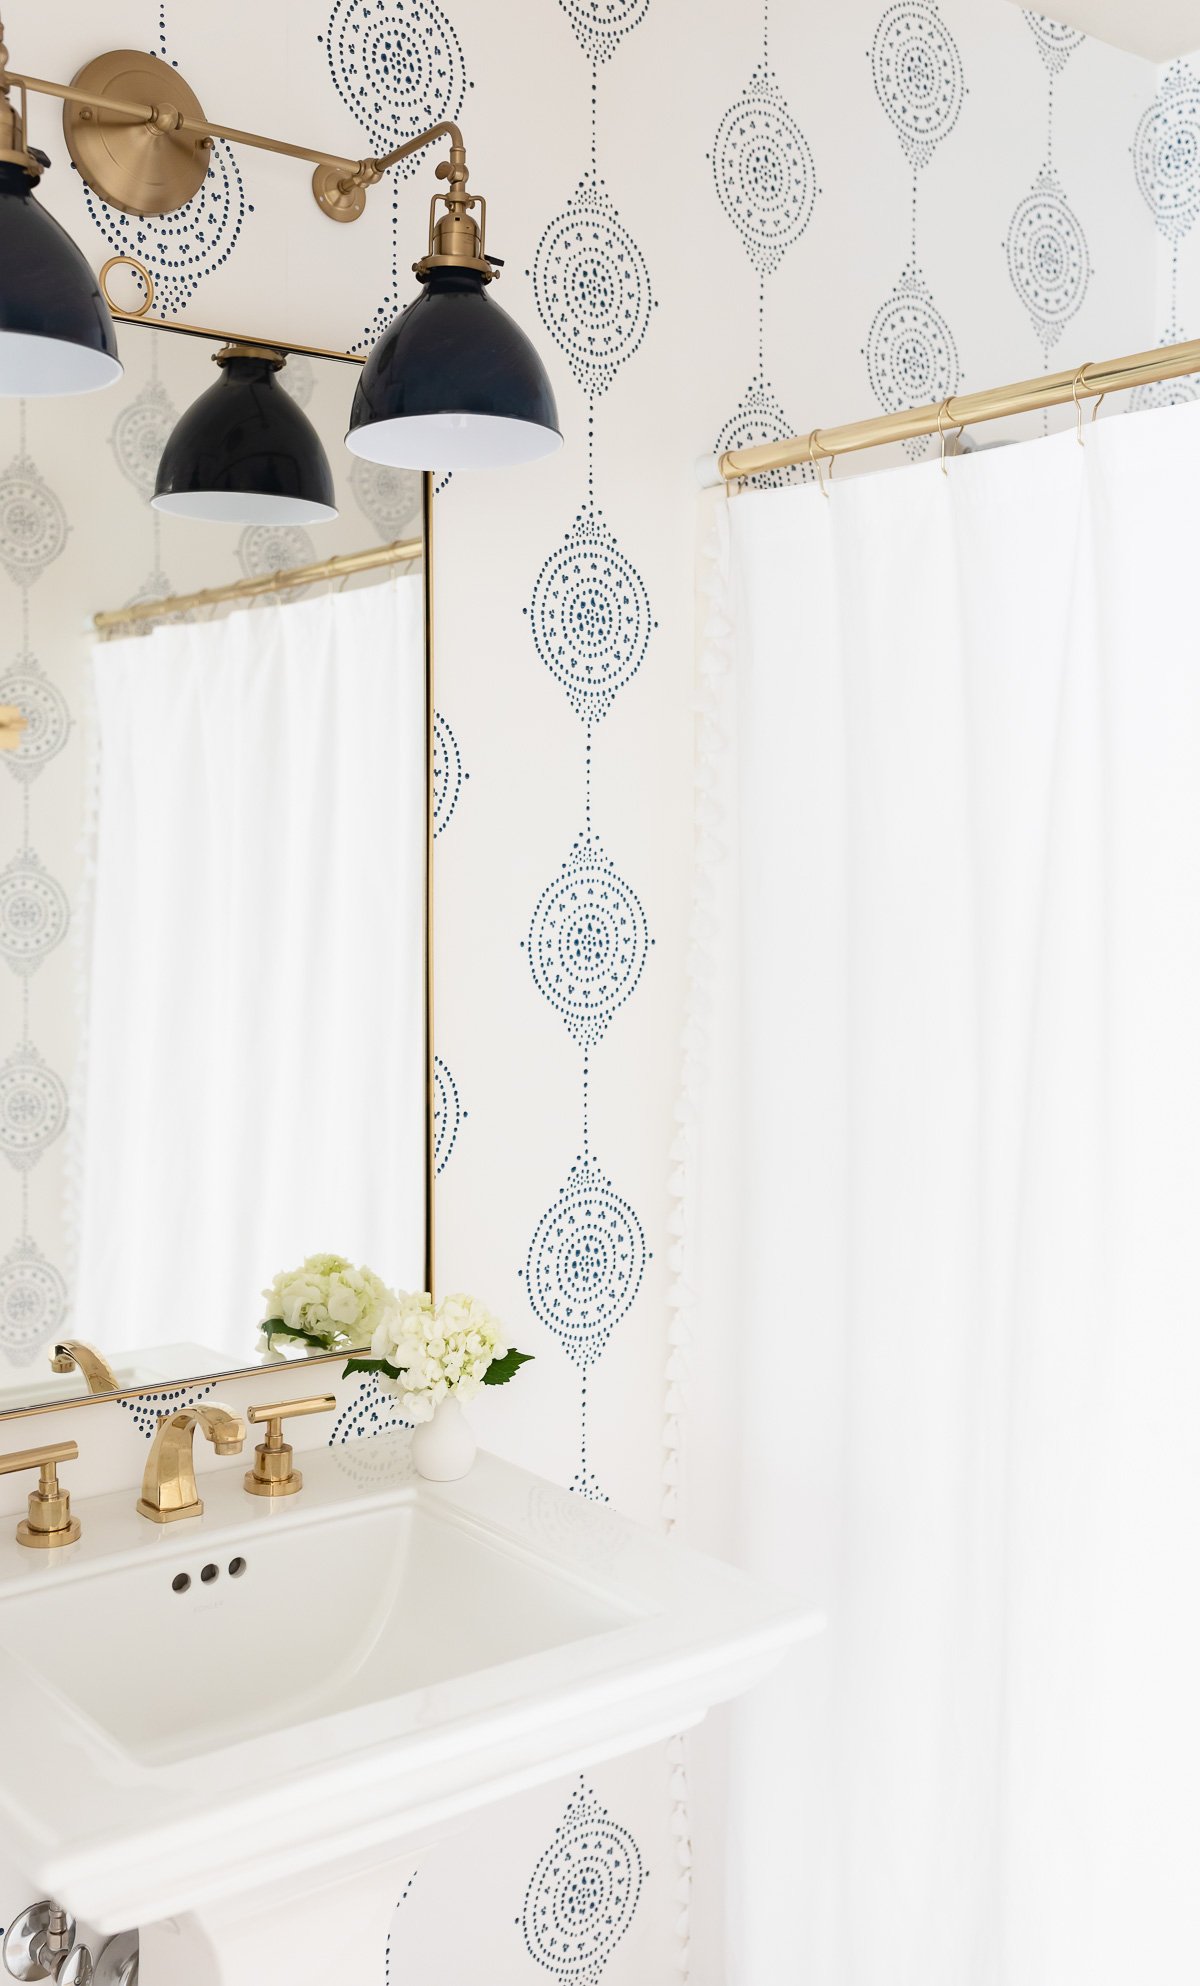 A bathroom with navy blue and white block print wallpaper.